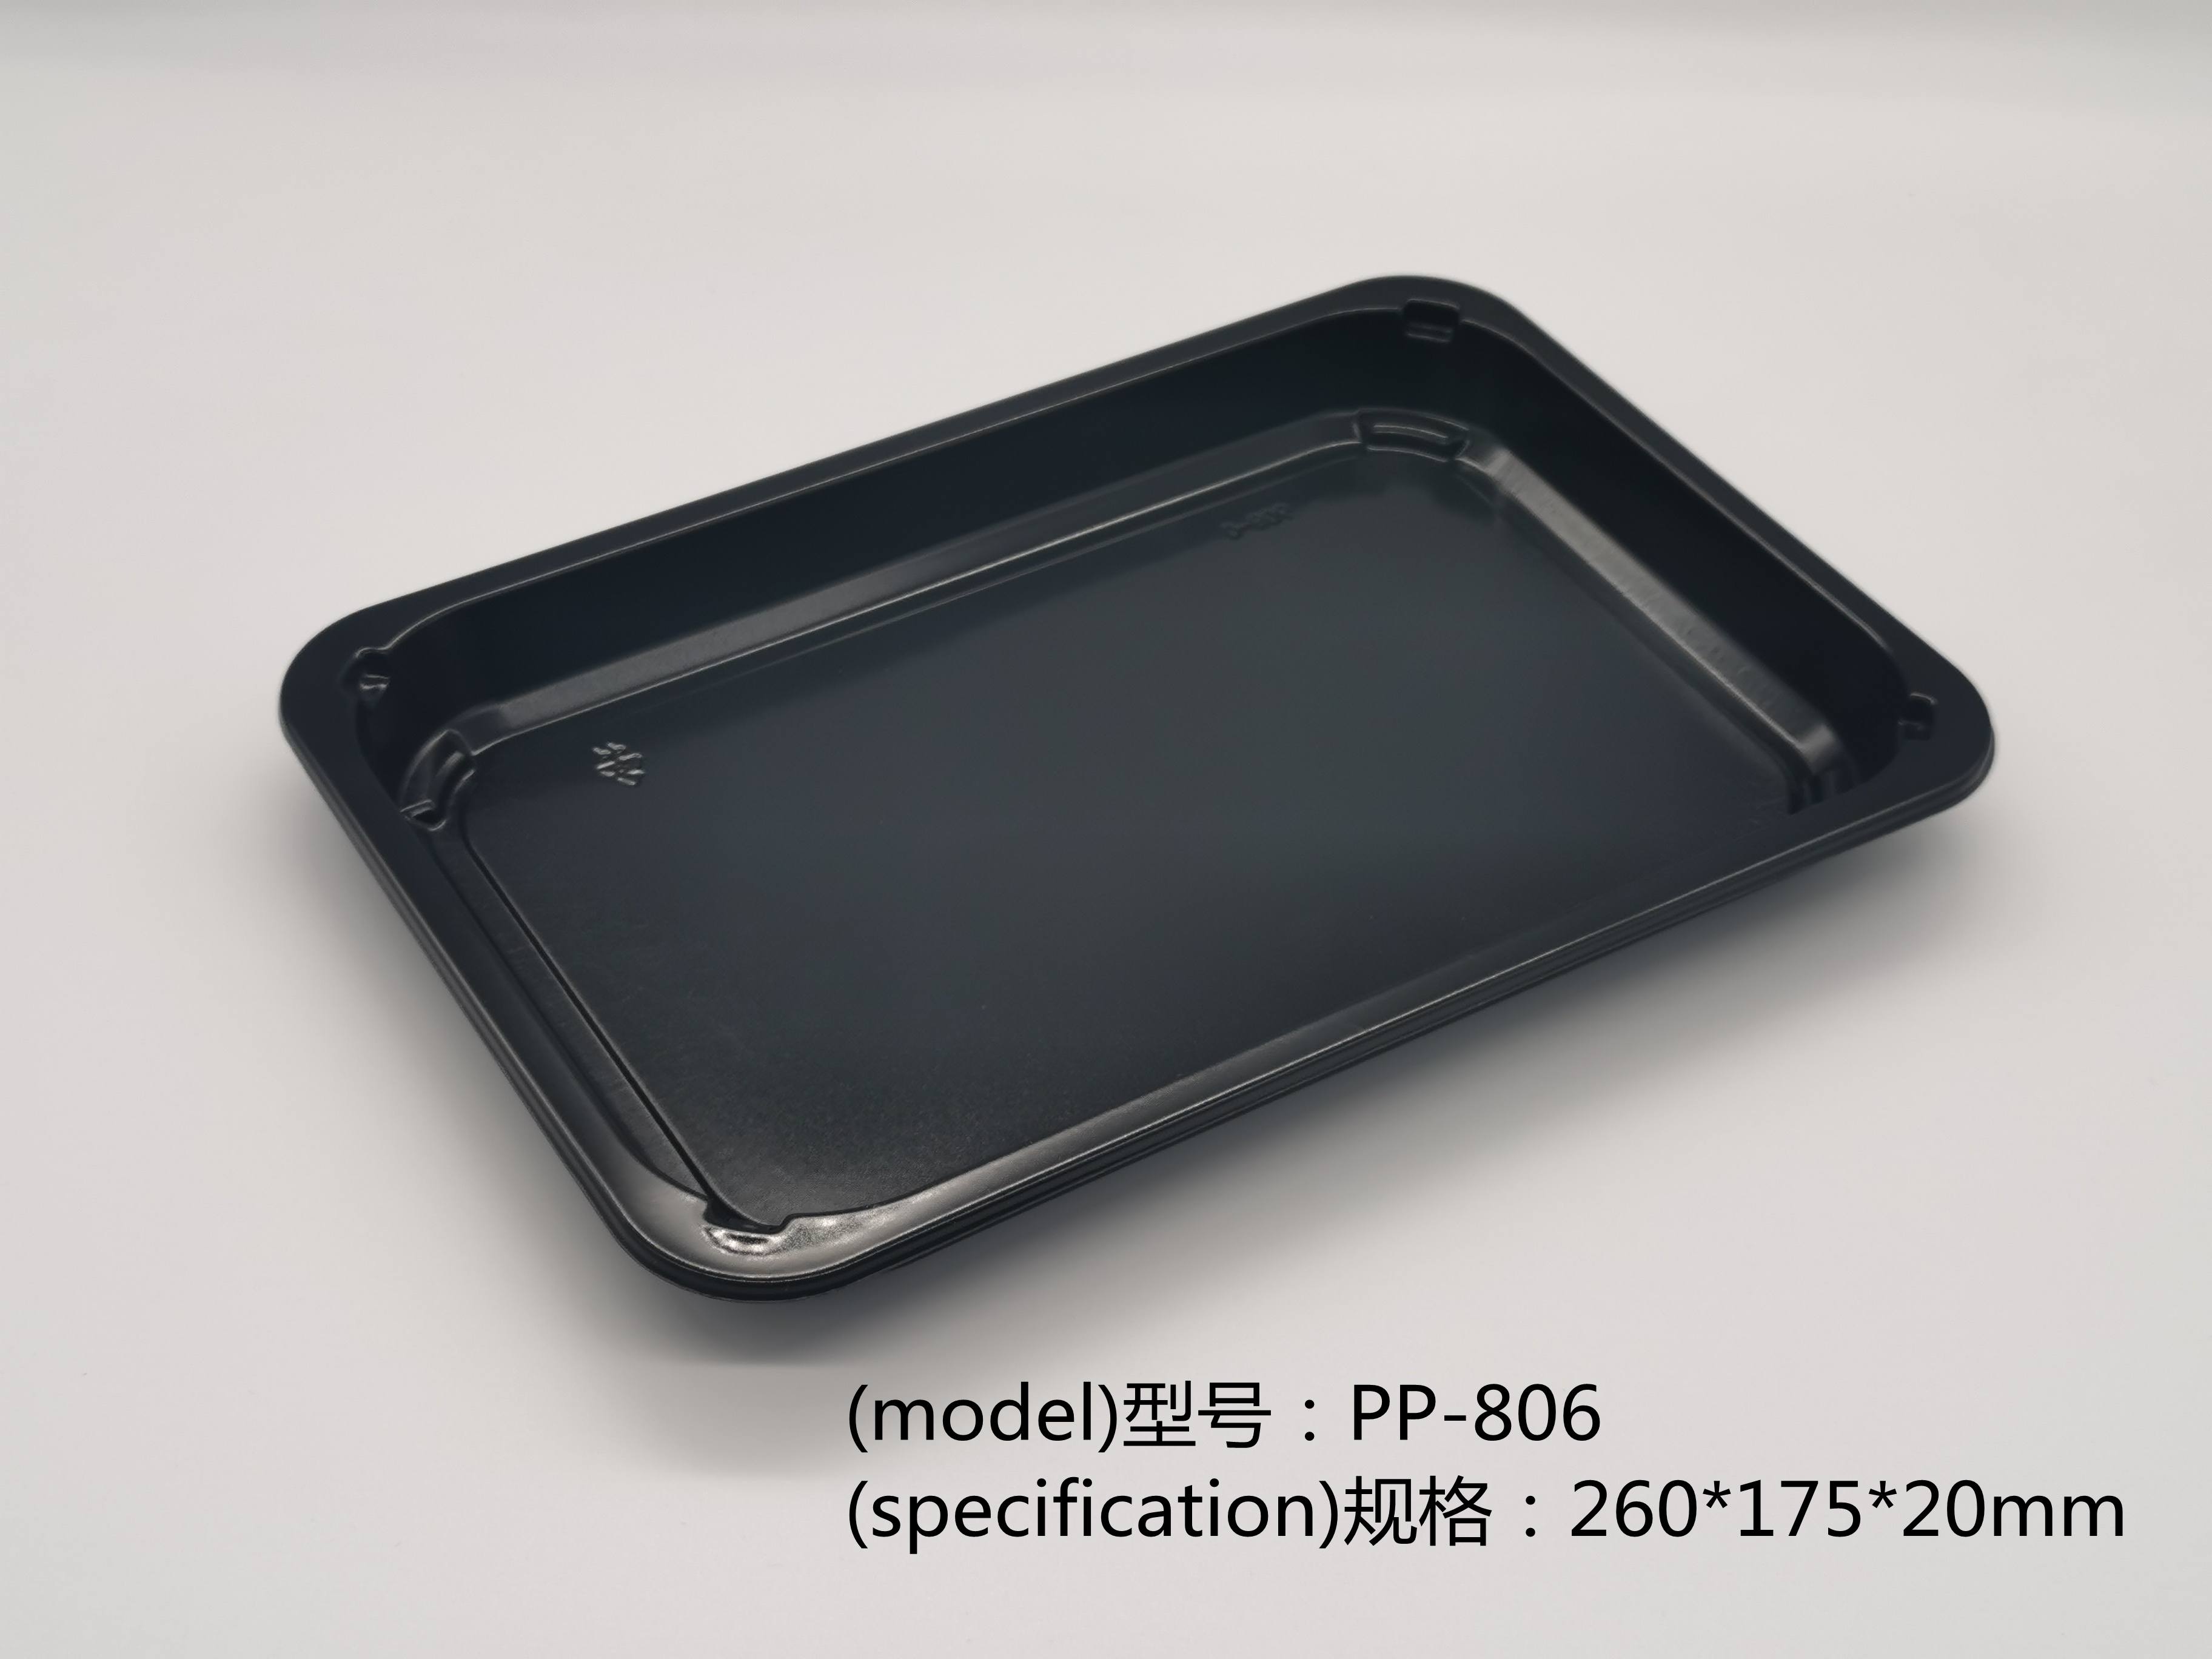 Cafeteria Trays Manufacturers and Suppliers in the USA